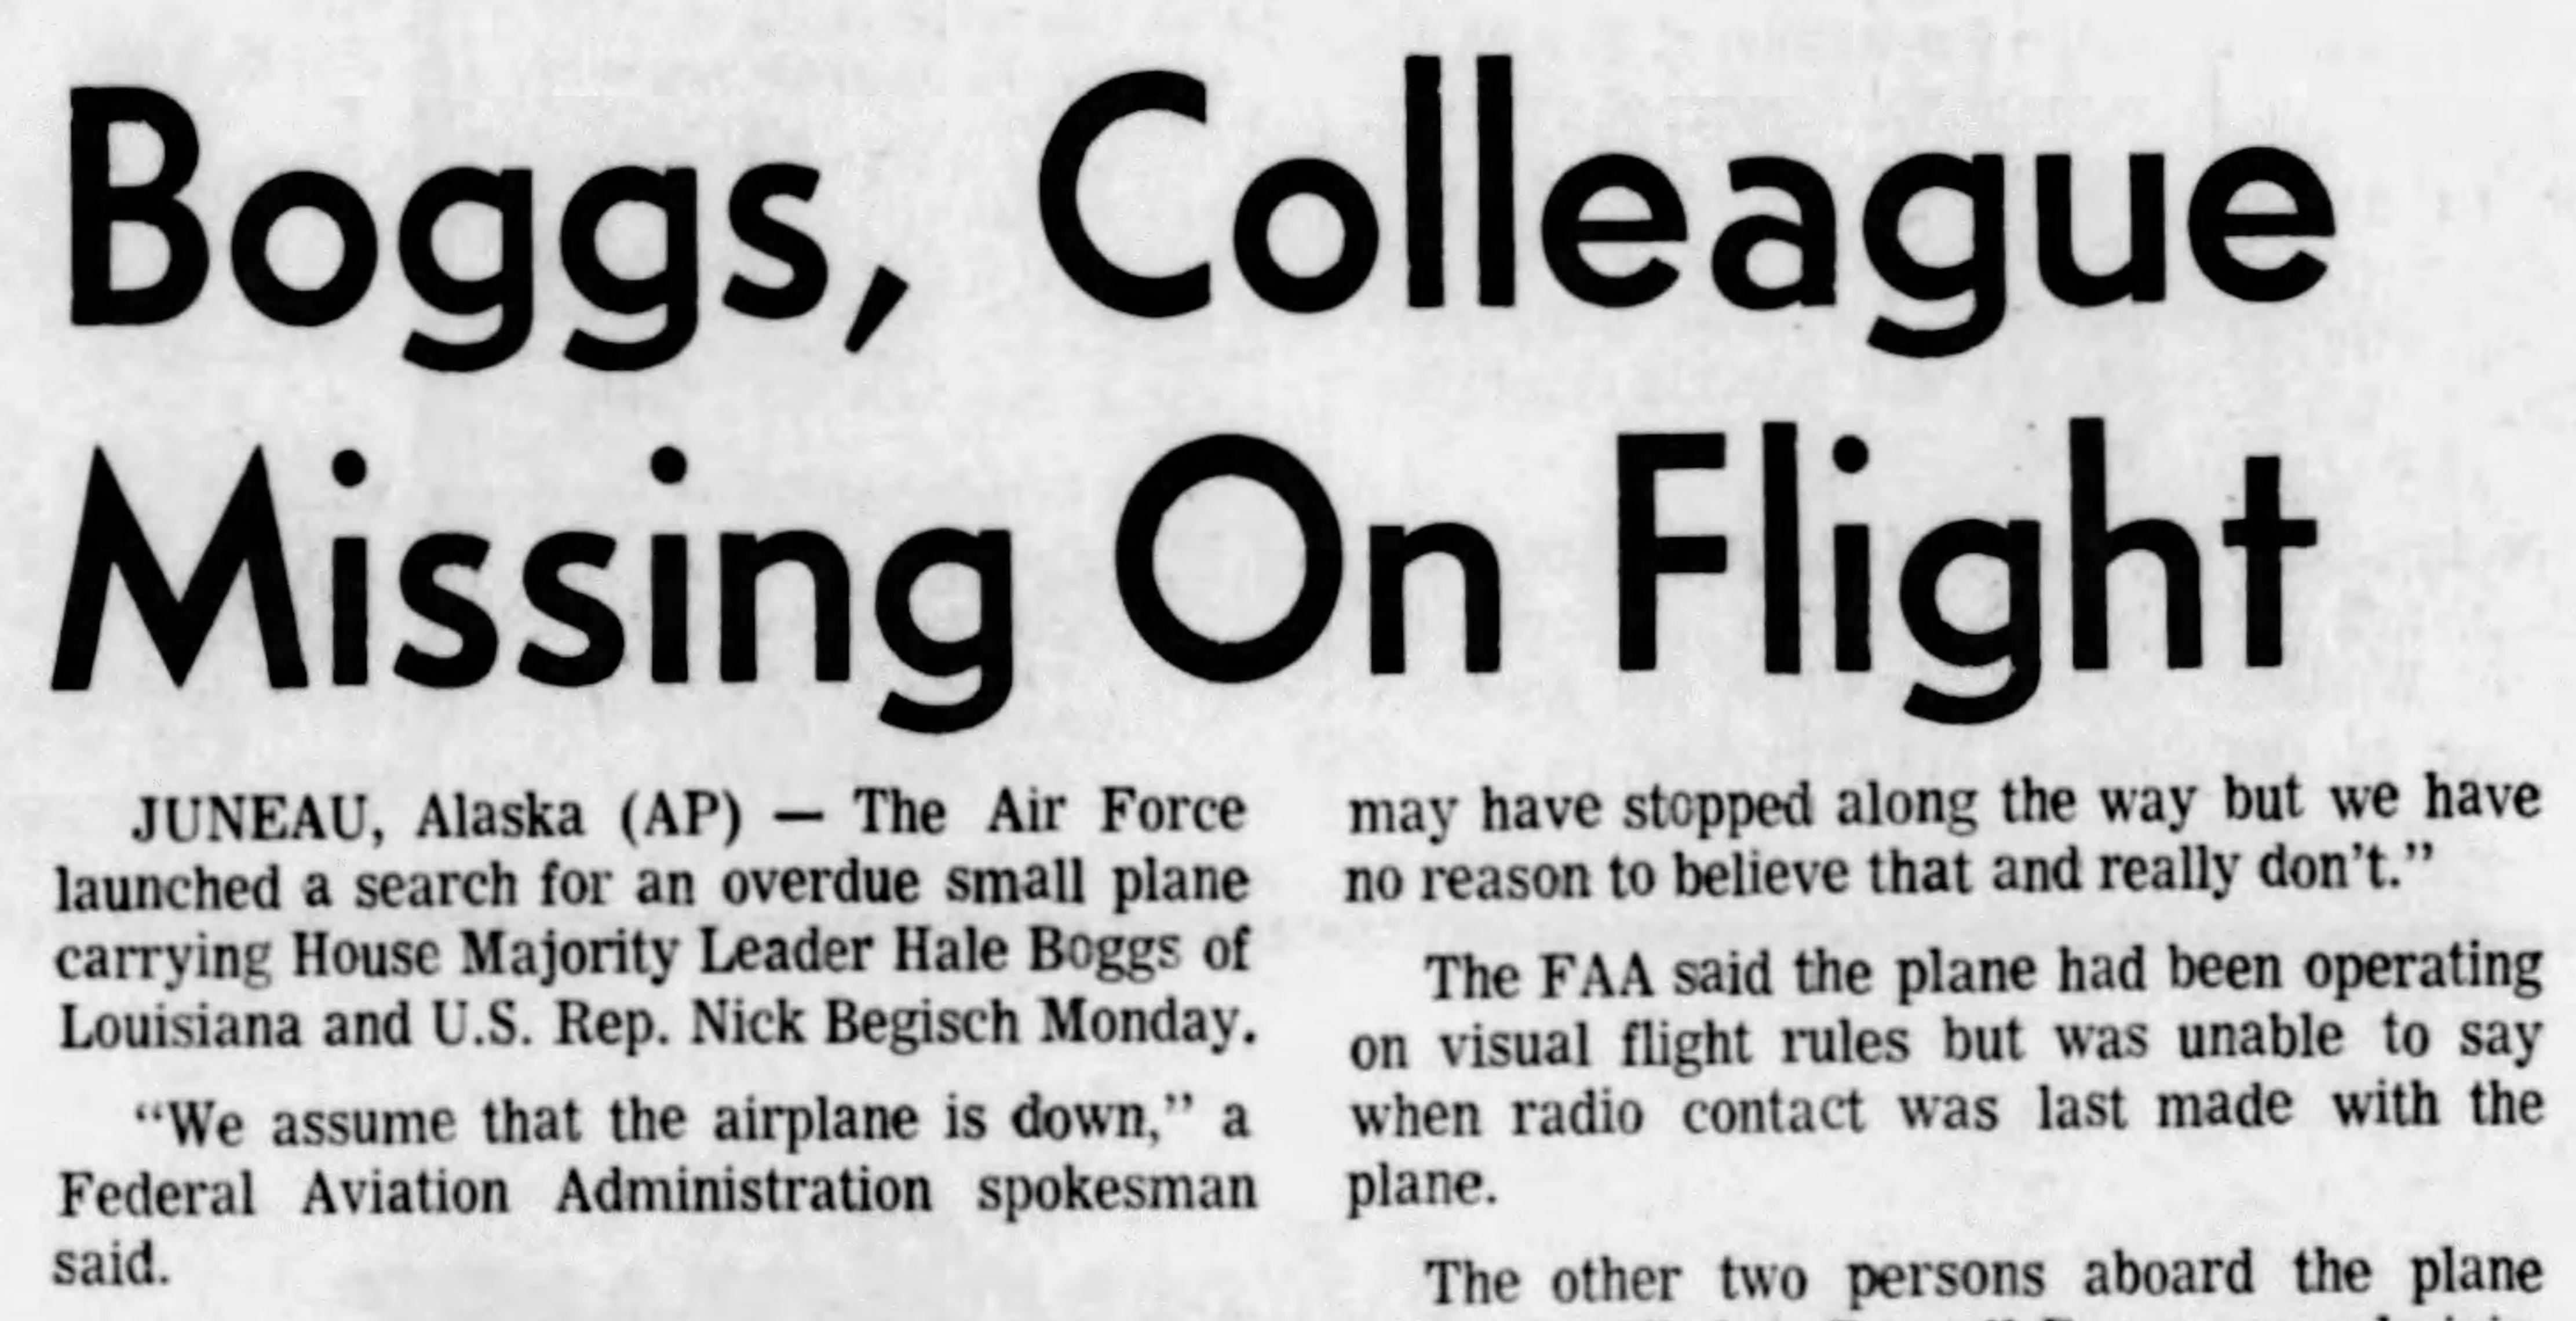 A newspaper clipping about the disappearance of a small plane in Alaska carrying Rep. Hale Boggs (D-La.) along with Rep. Nick Begich, and others, in 1972.